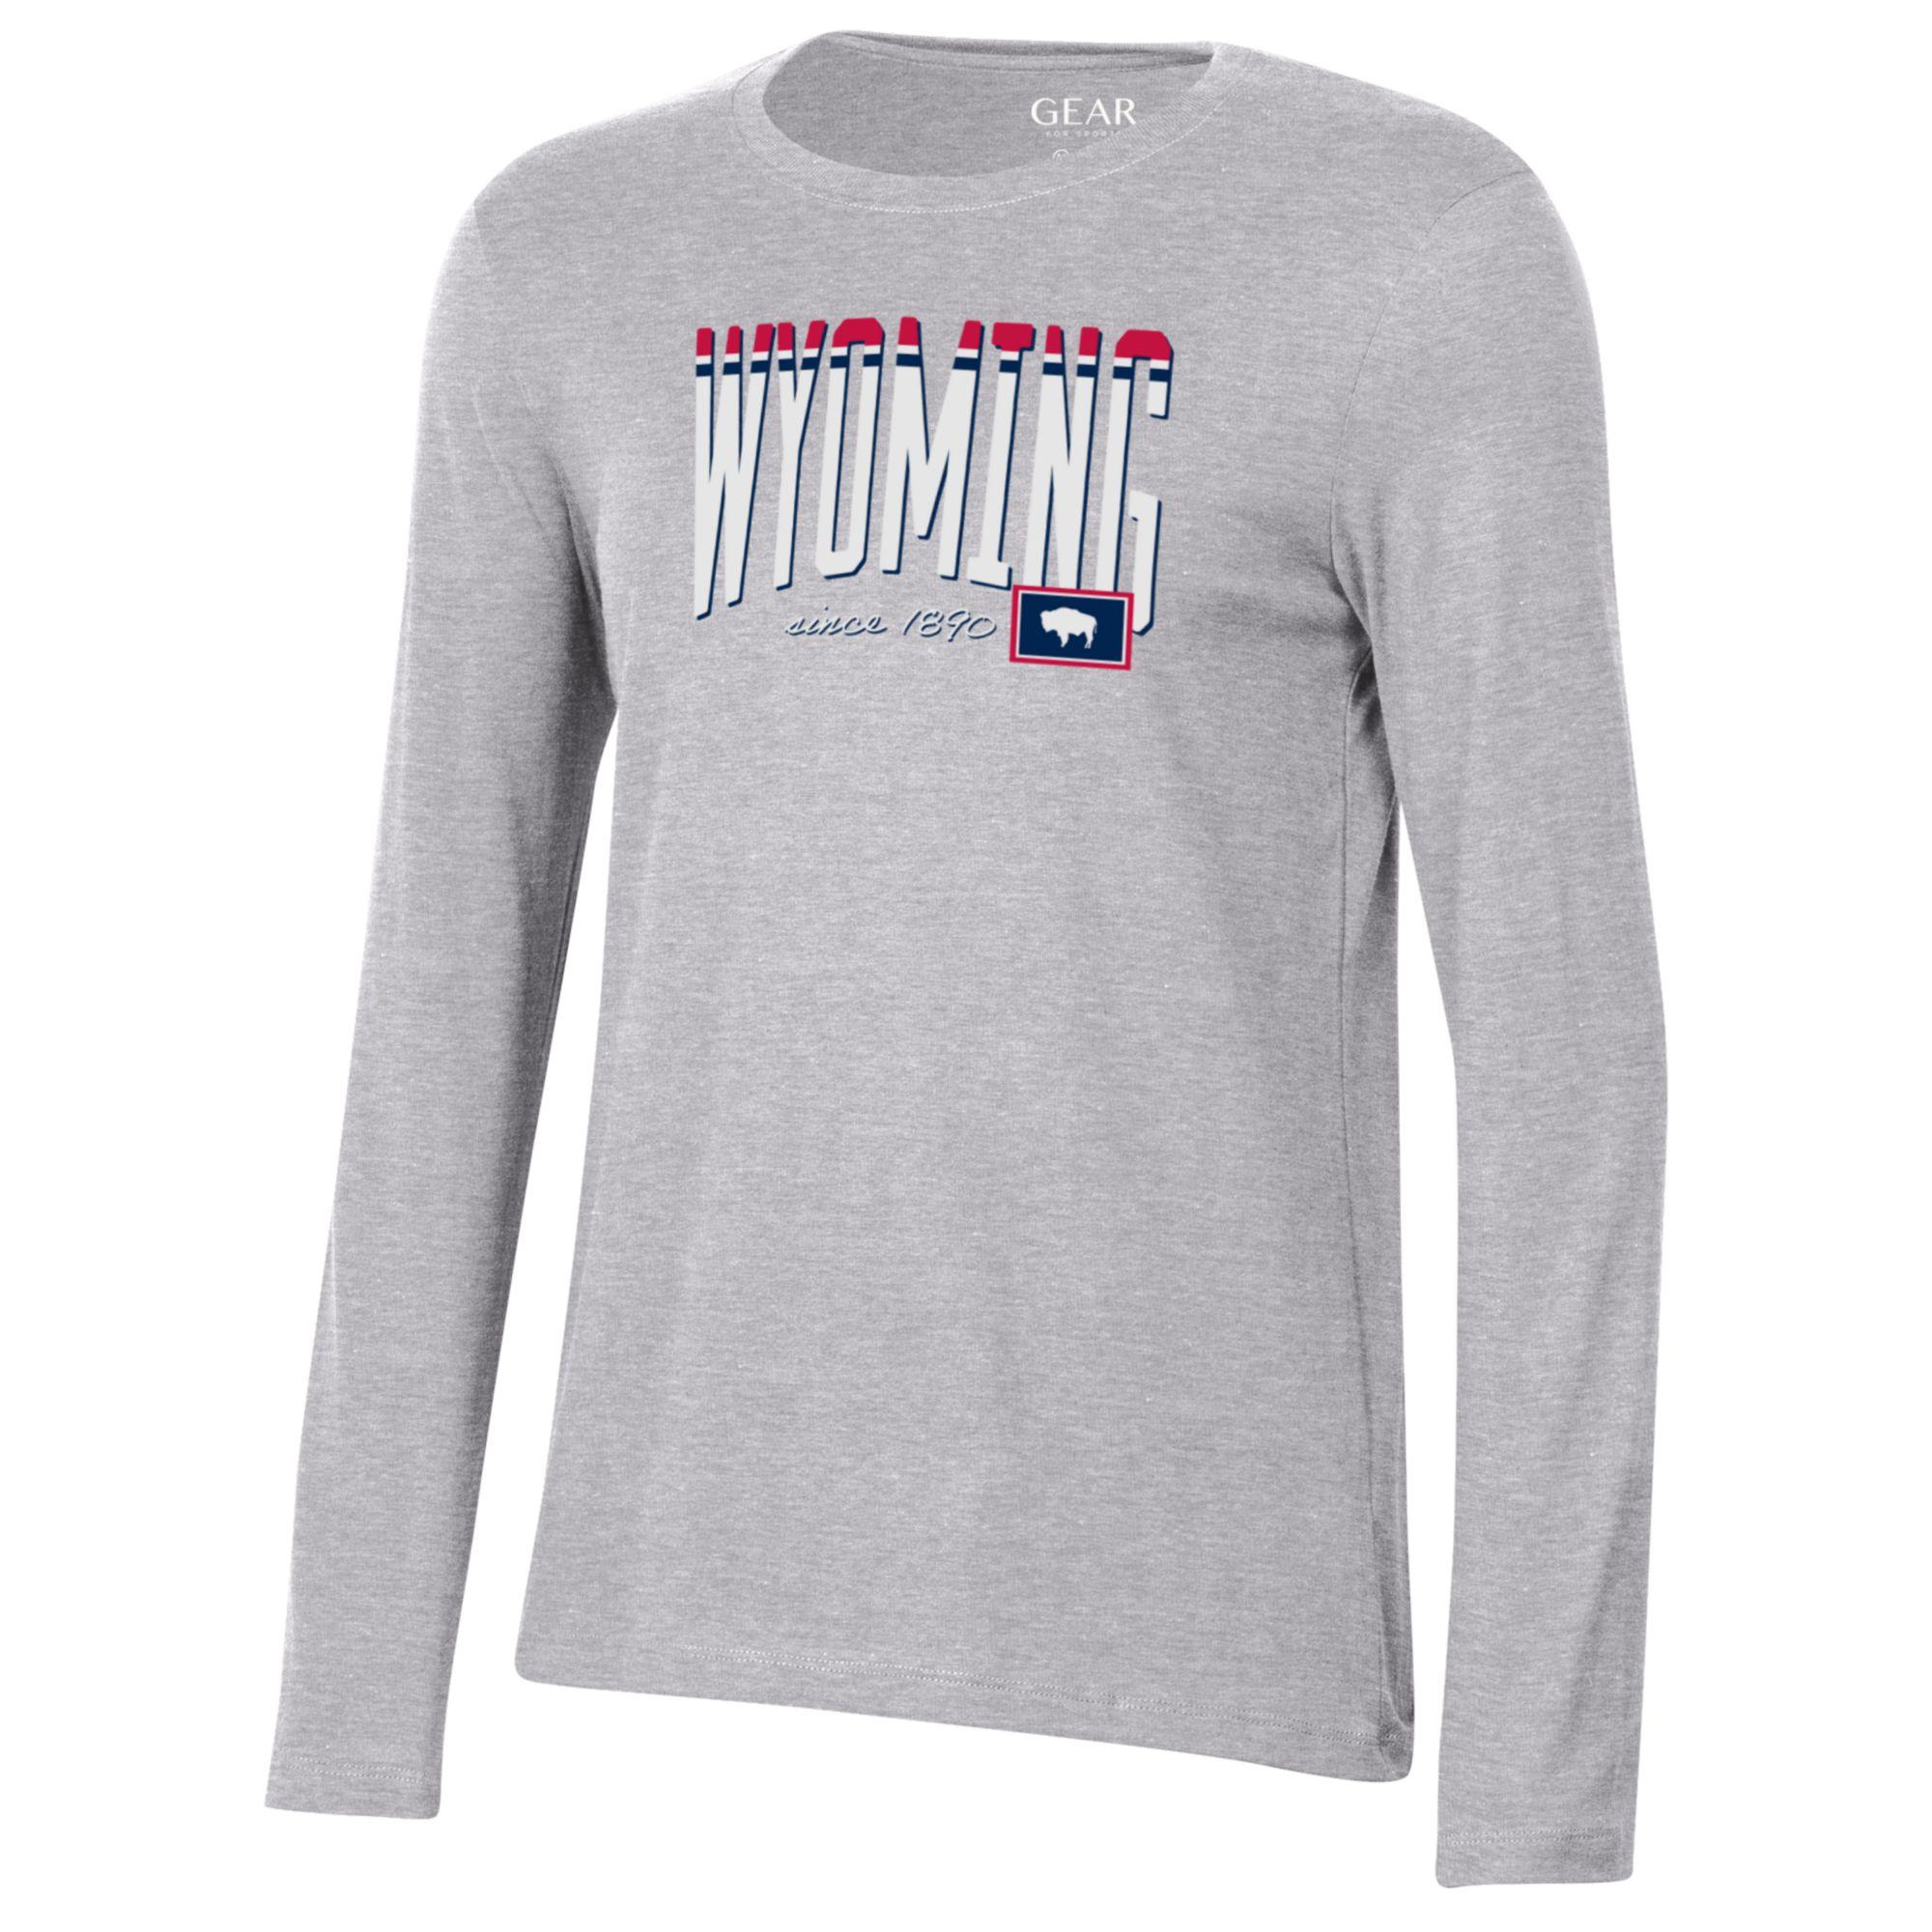 Grey women's long sleeve t-shirt. Wyoming on center chest in white, red and blue, with state flag in lower left corner. Design is center chest.